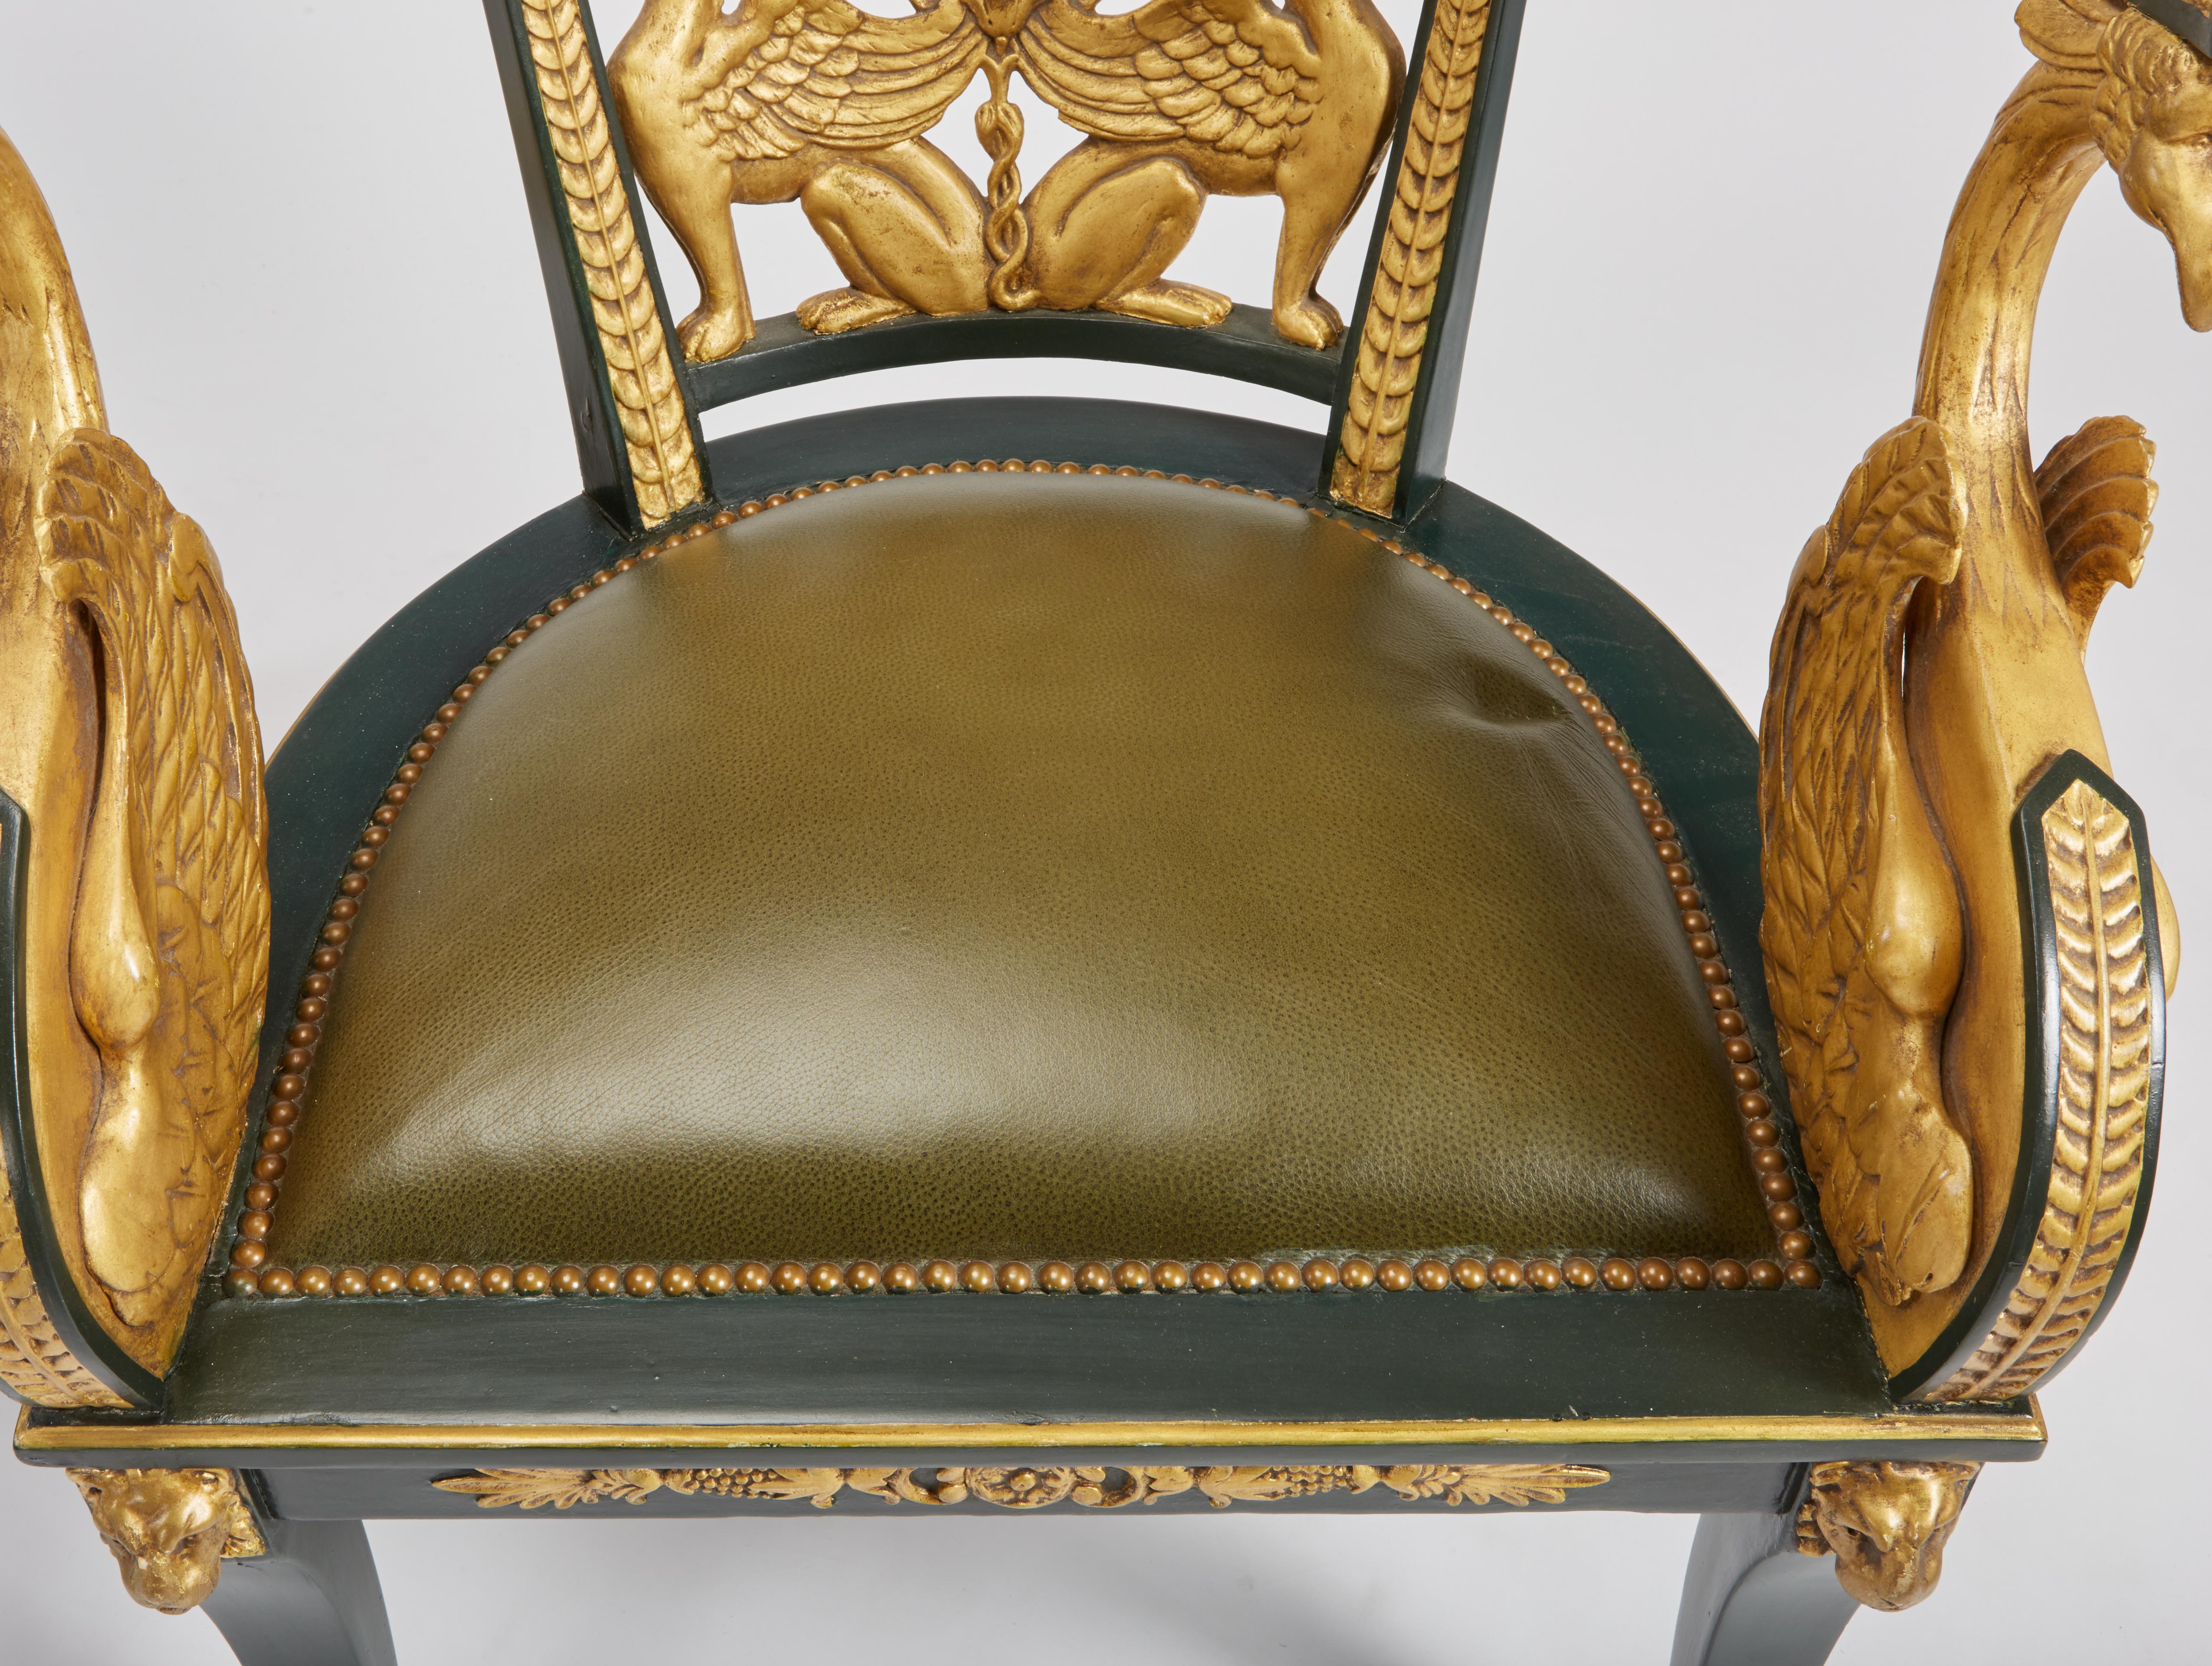 Pair of Giltwood & Green Imperial Roman Style Tub Chairs with Greek Key & Swans 2